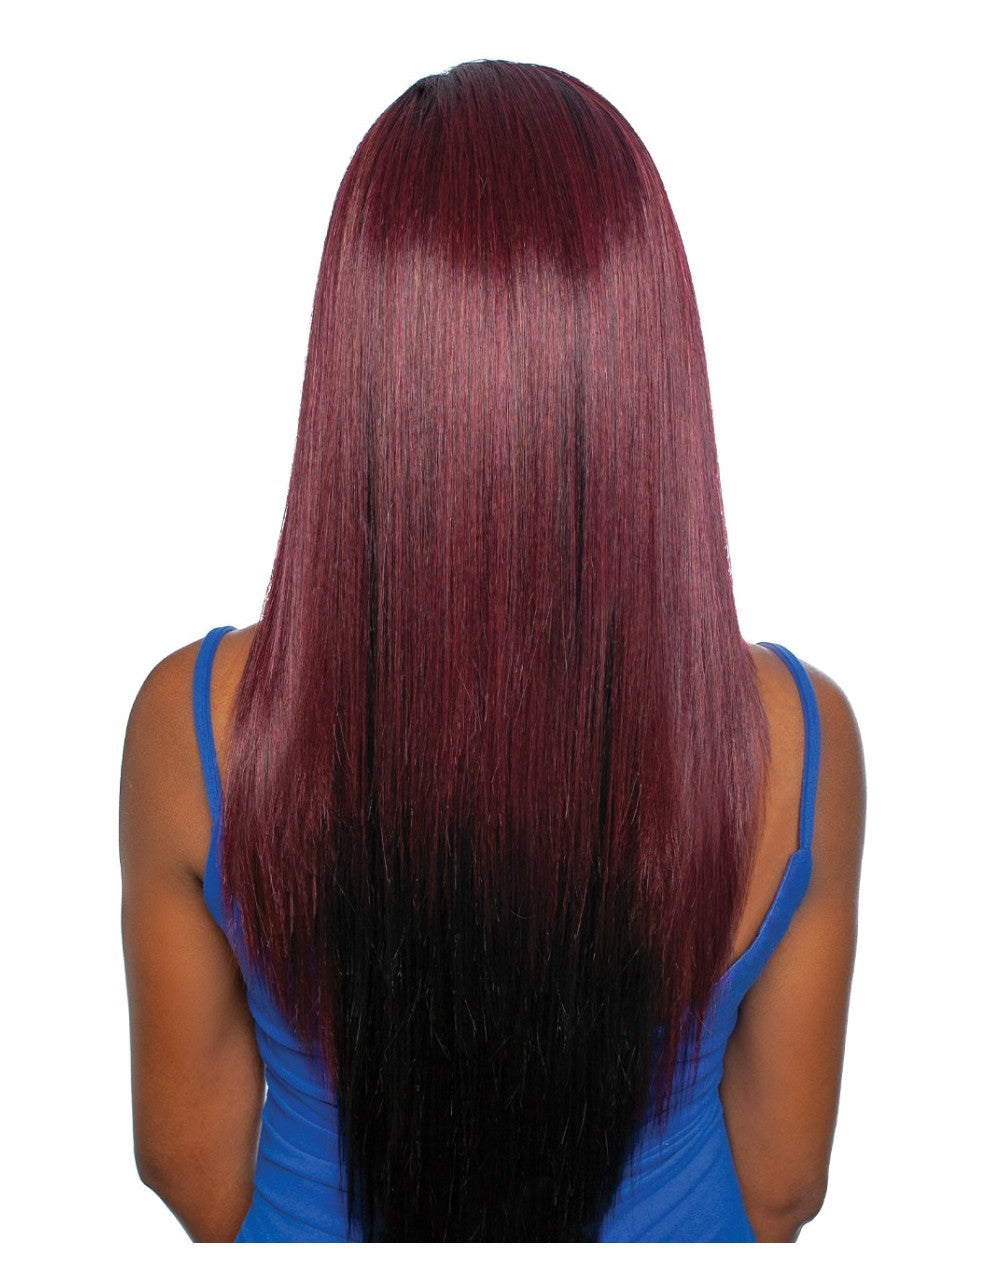 Mane Concept Red Carpet 13"x 7" Limitless HD Lace Front Wig RCHL207 Evon - Elevate Styles